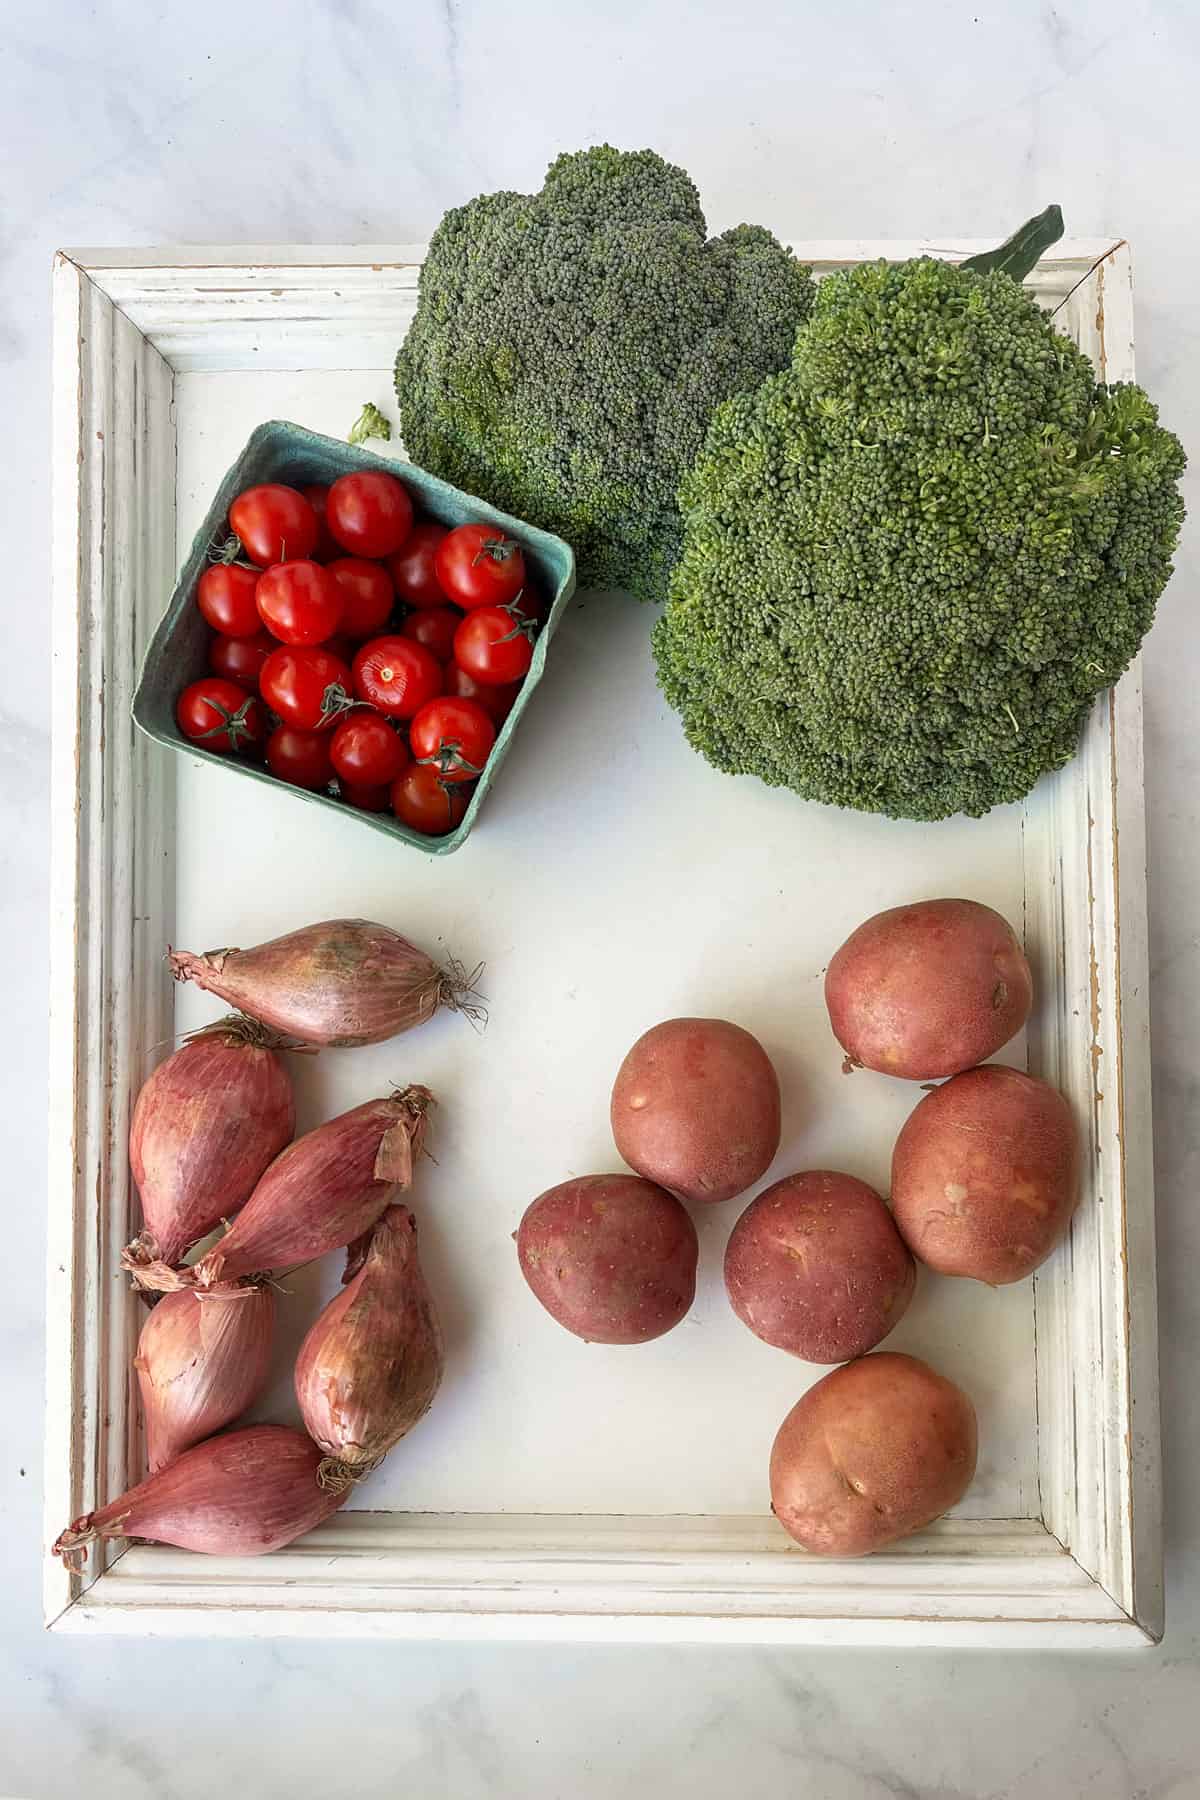 2 broccoli crowns, 6 red skinned potatoes, 6 shallots and a pint of cherry tomatoes on a white wooden tray